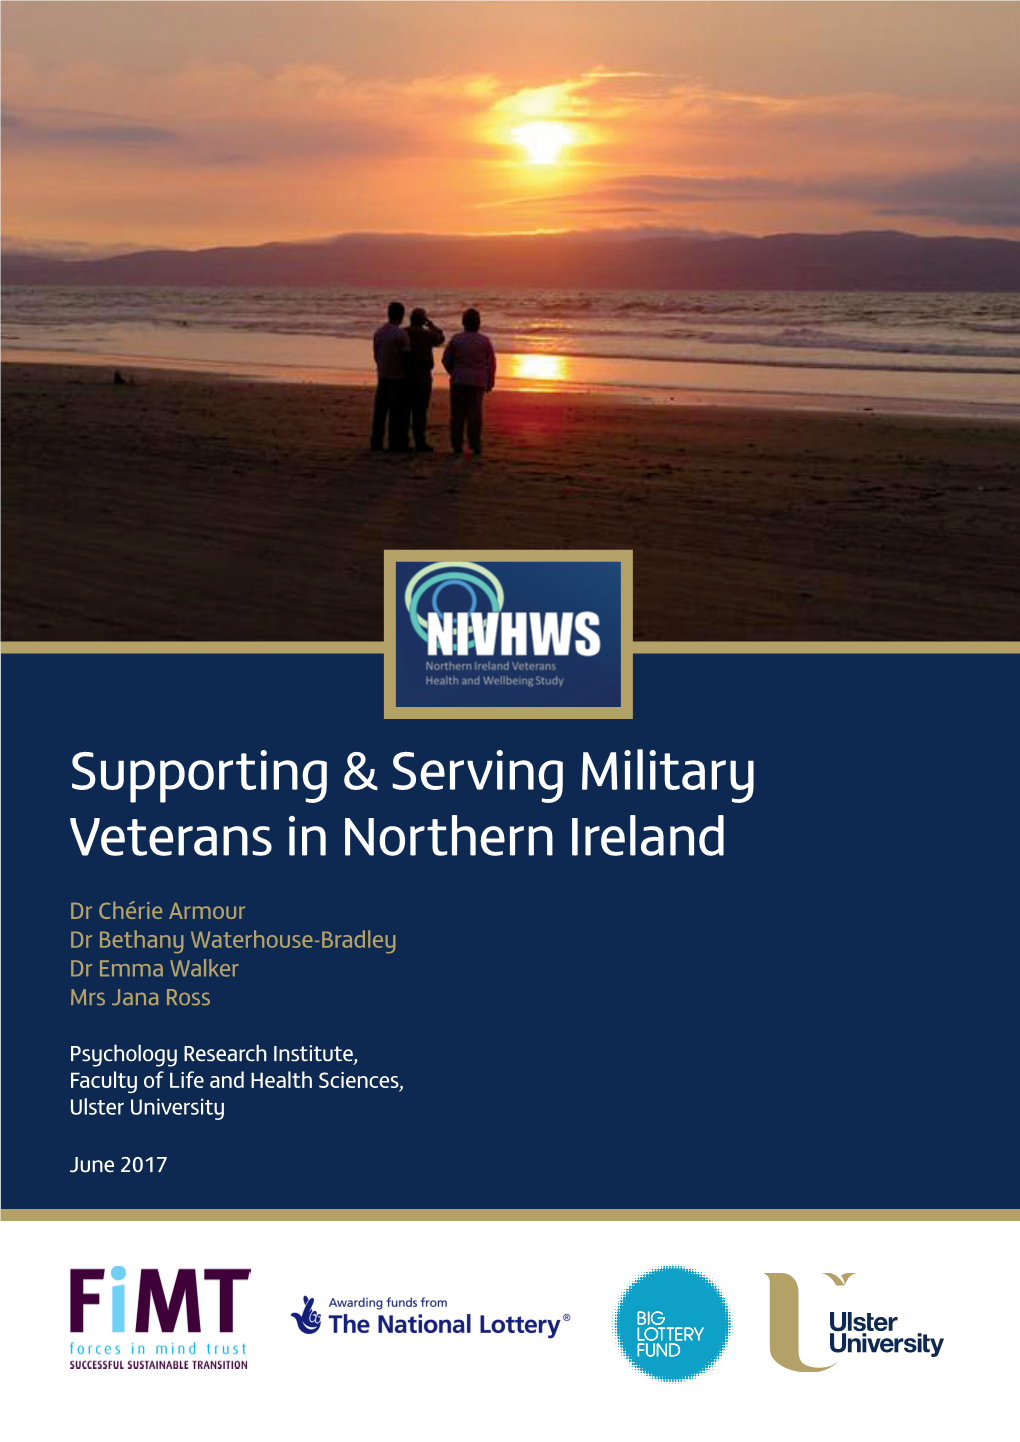 Supporting & Serving Military Veterans in Northern Ireland